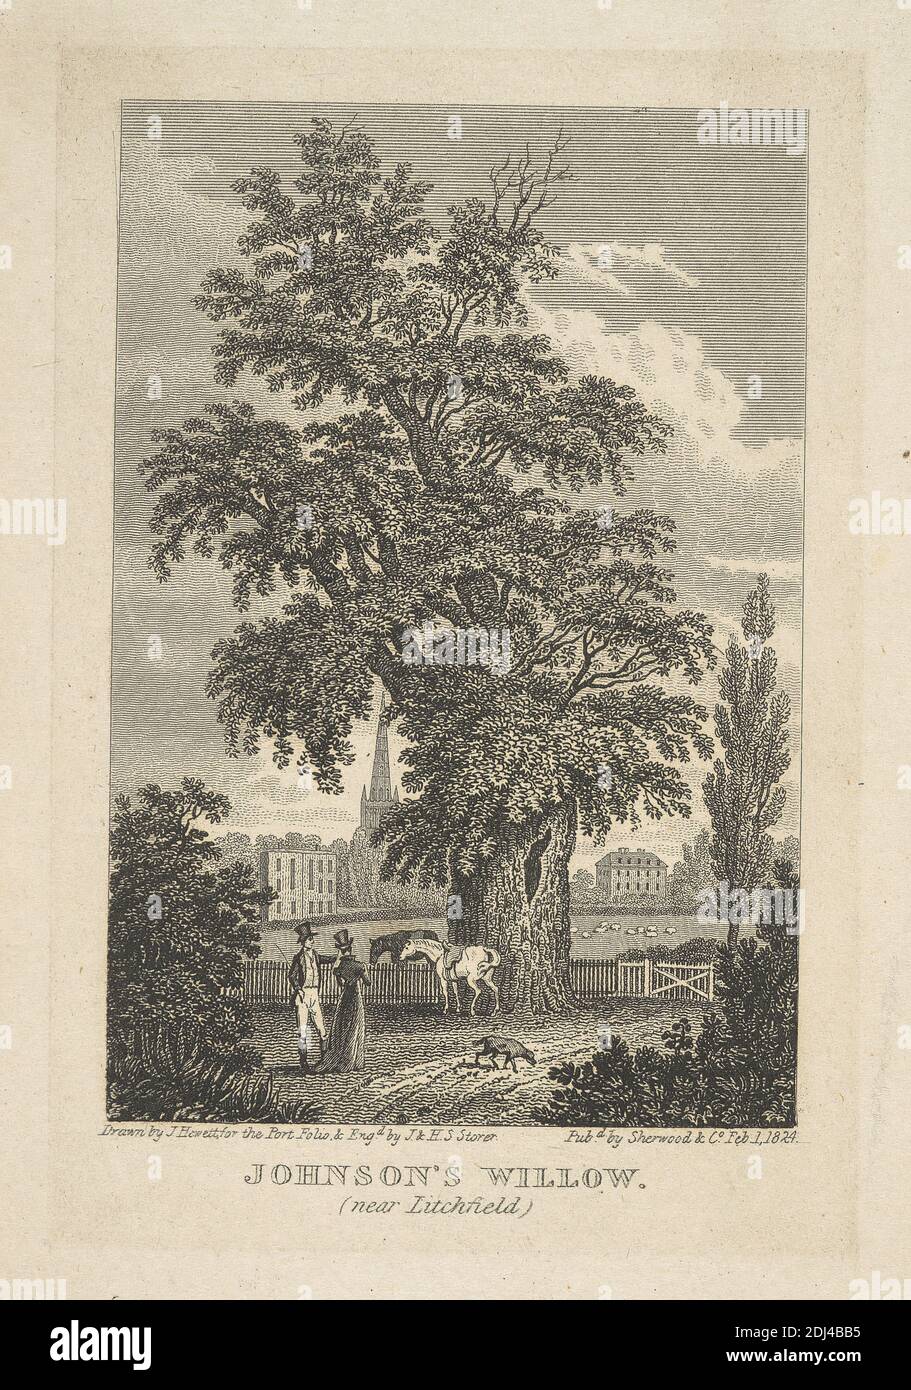 Johnson's Willow, James S. Storer, 1771–1853, British, And Henry S. Storer, 1795–1837, British, after unknown artist, ( Hewitt, J. ), undated, Engraving, Sheet: 6 1/2 x 4 1/8in. (16.5 x 10.5cm Stock Photo